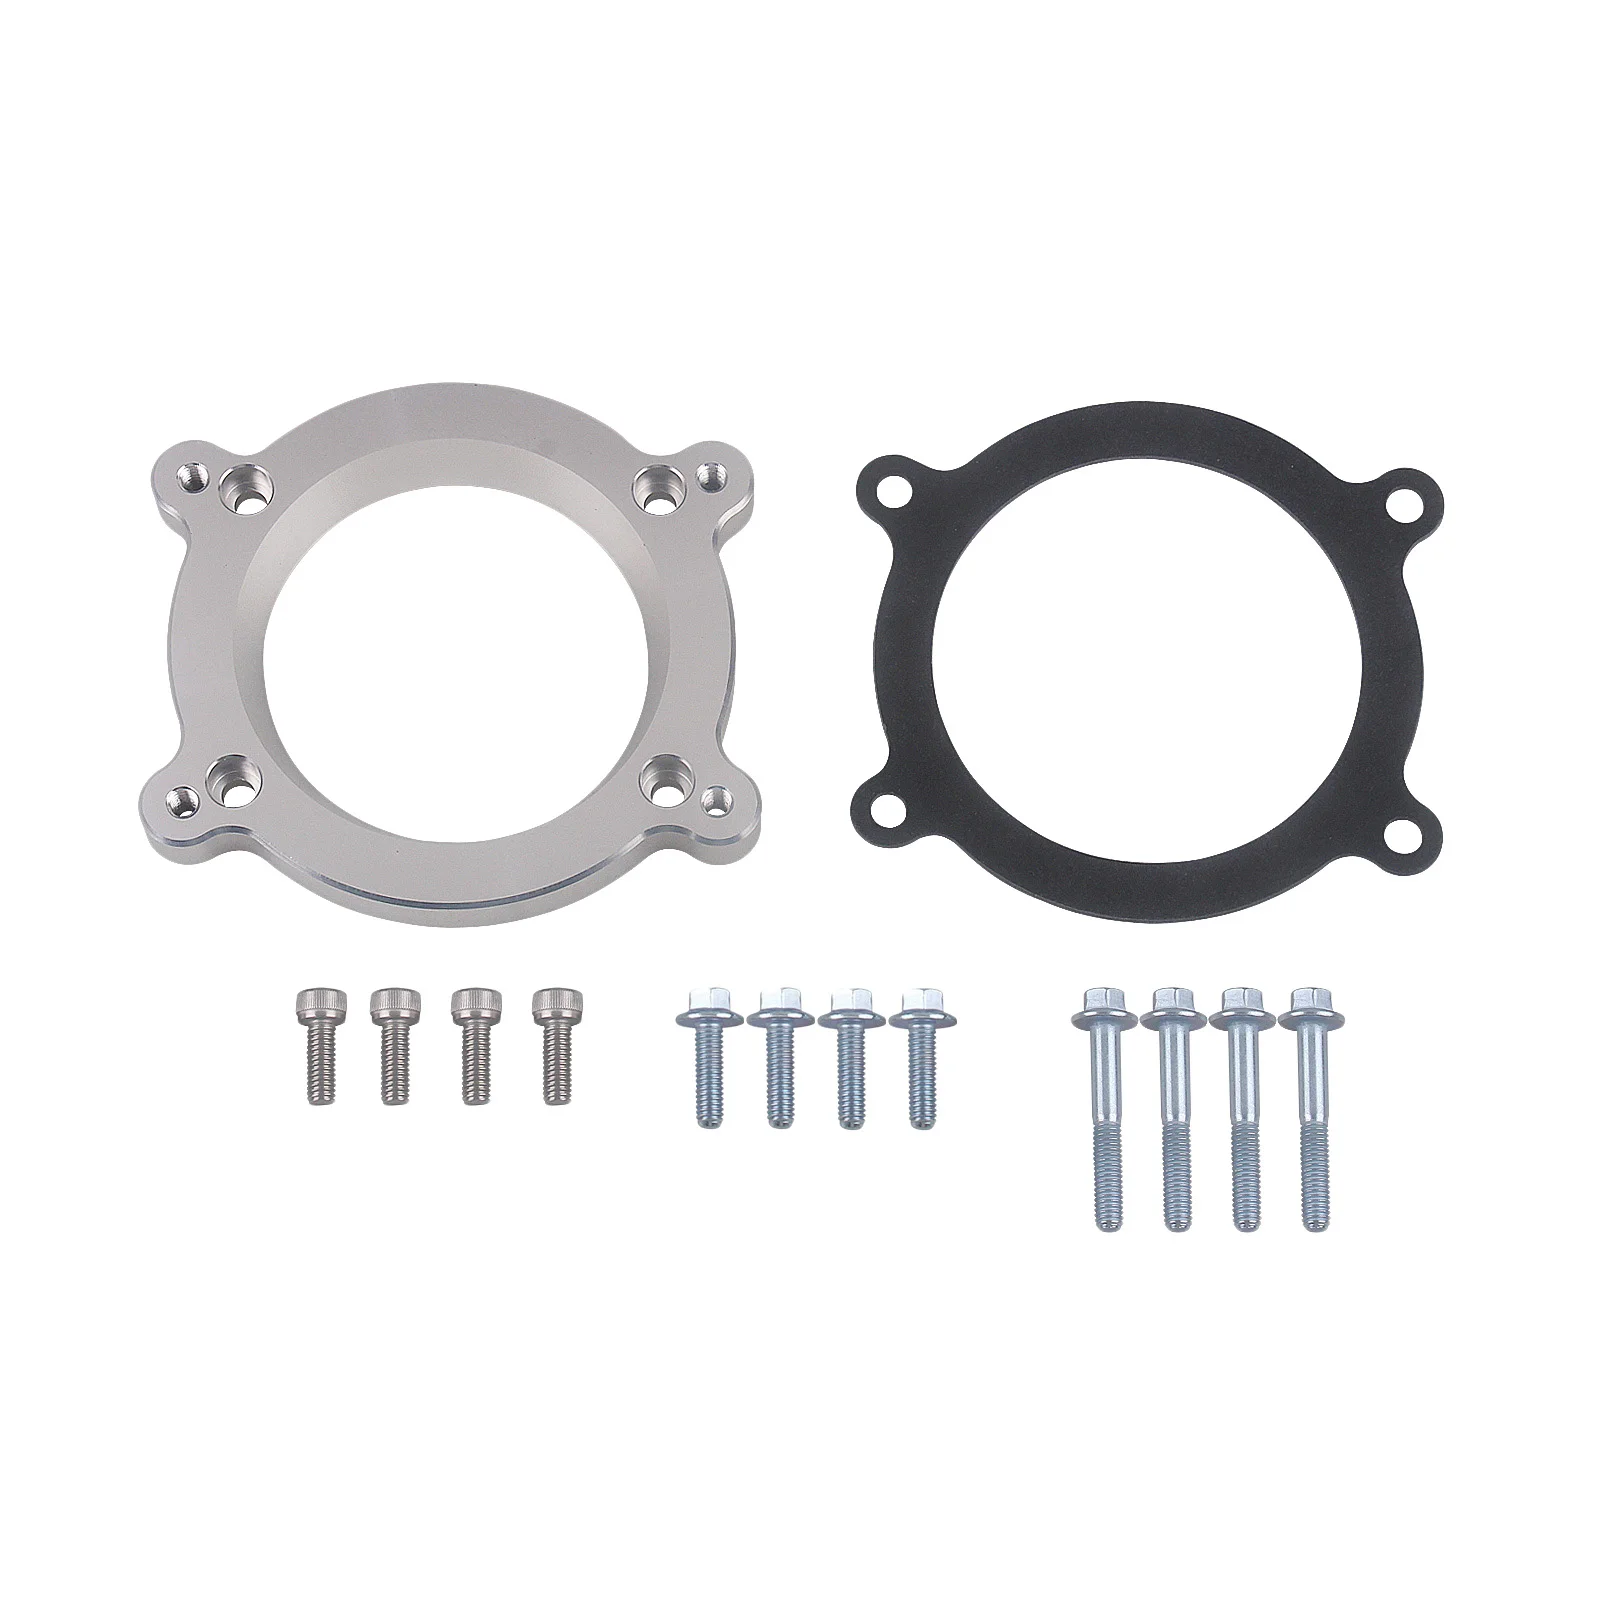 New LS4 ONLY Intake  to LS Throttle Body Adapter Plate Replacements  GXP 551572,   and DBC throttle bodies